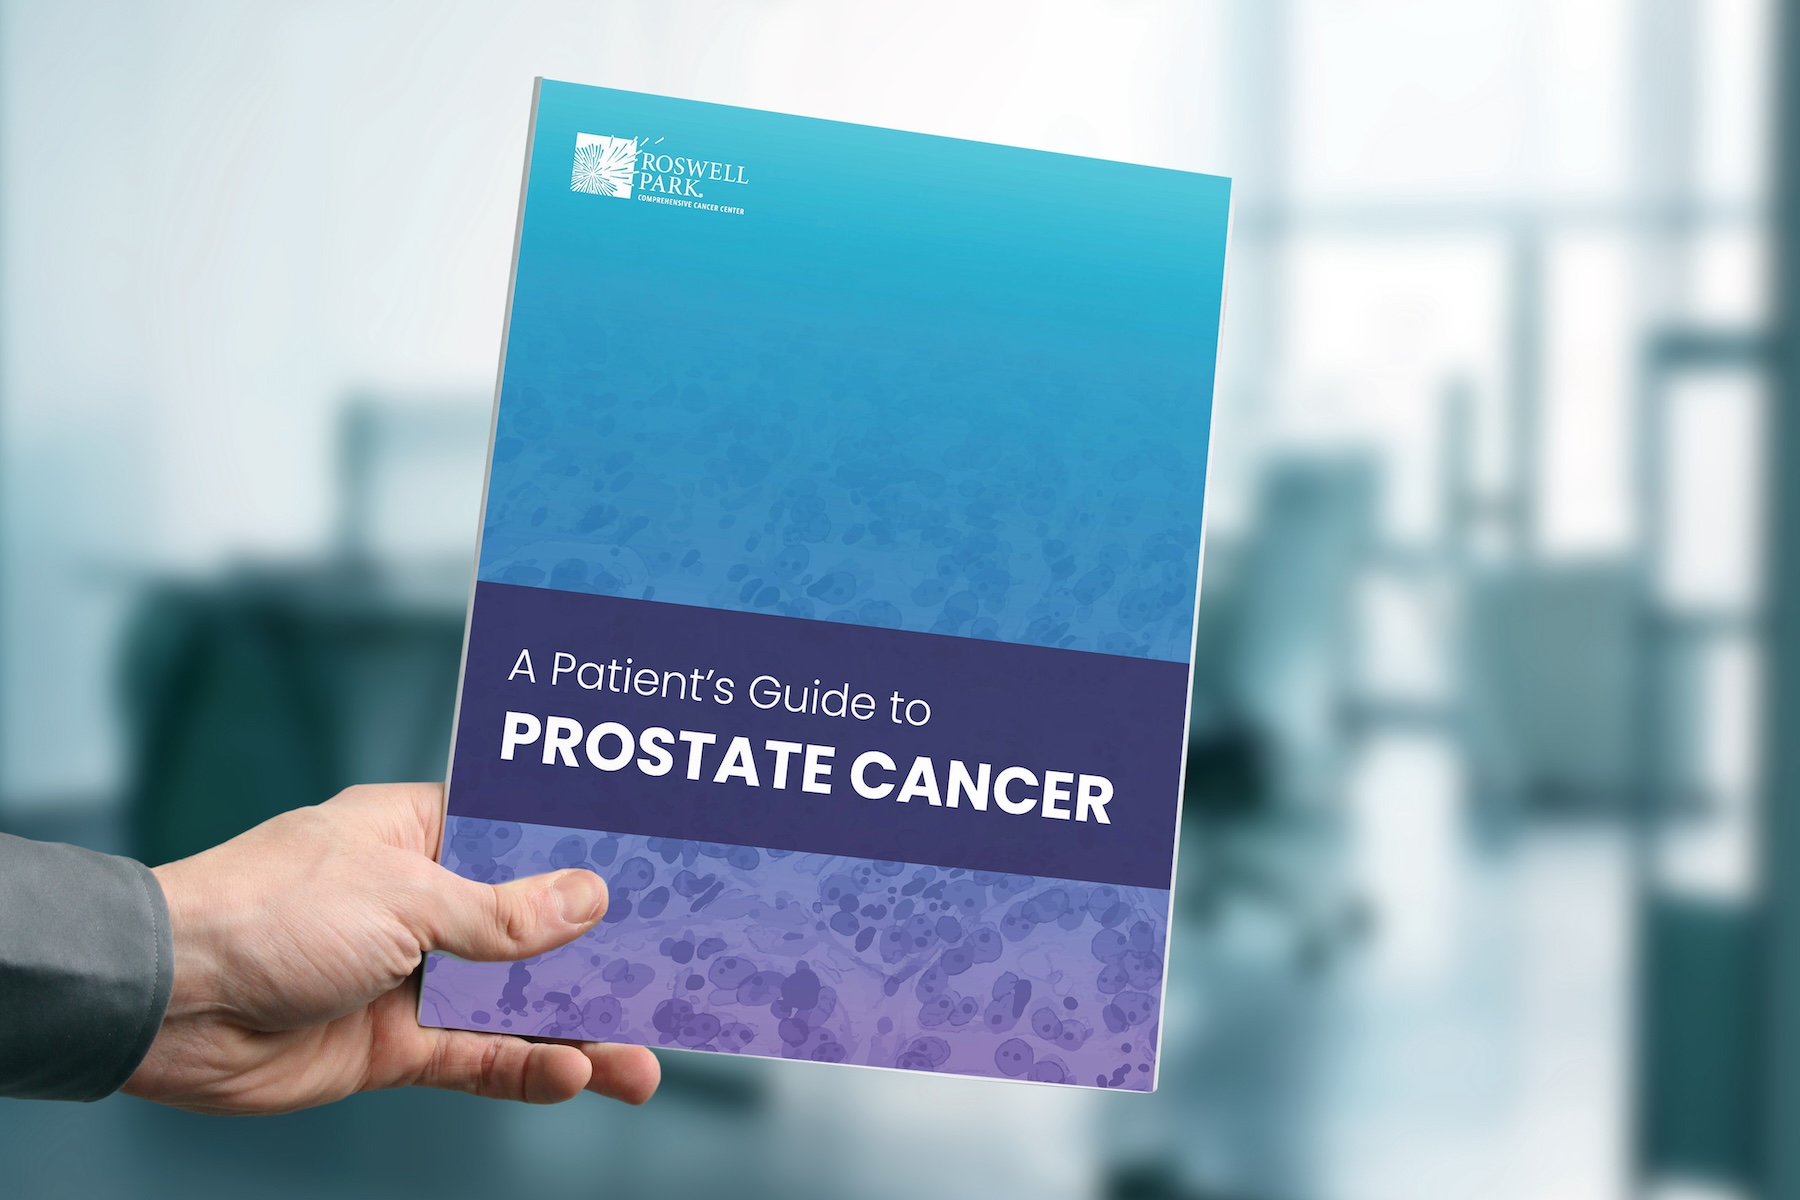 A Patient's Guide to Prostate Cancer Book being held by a hand